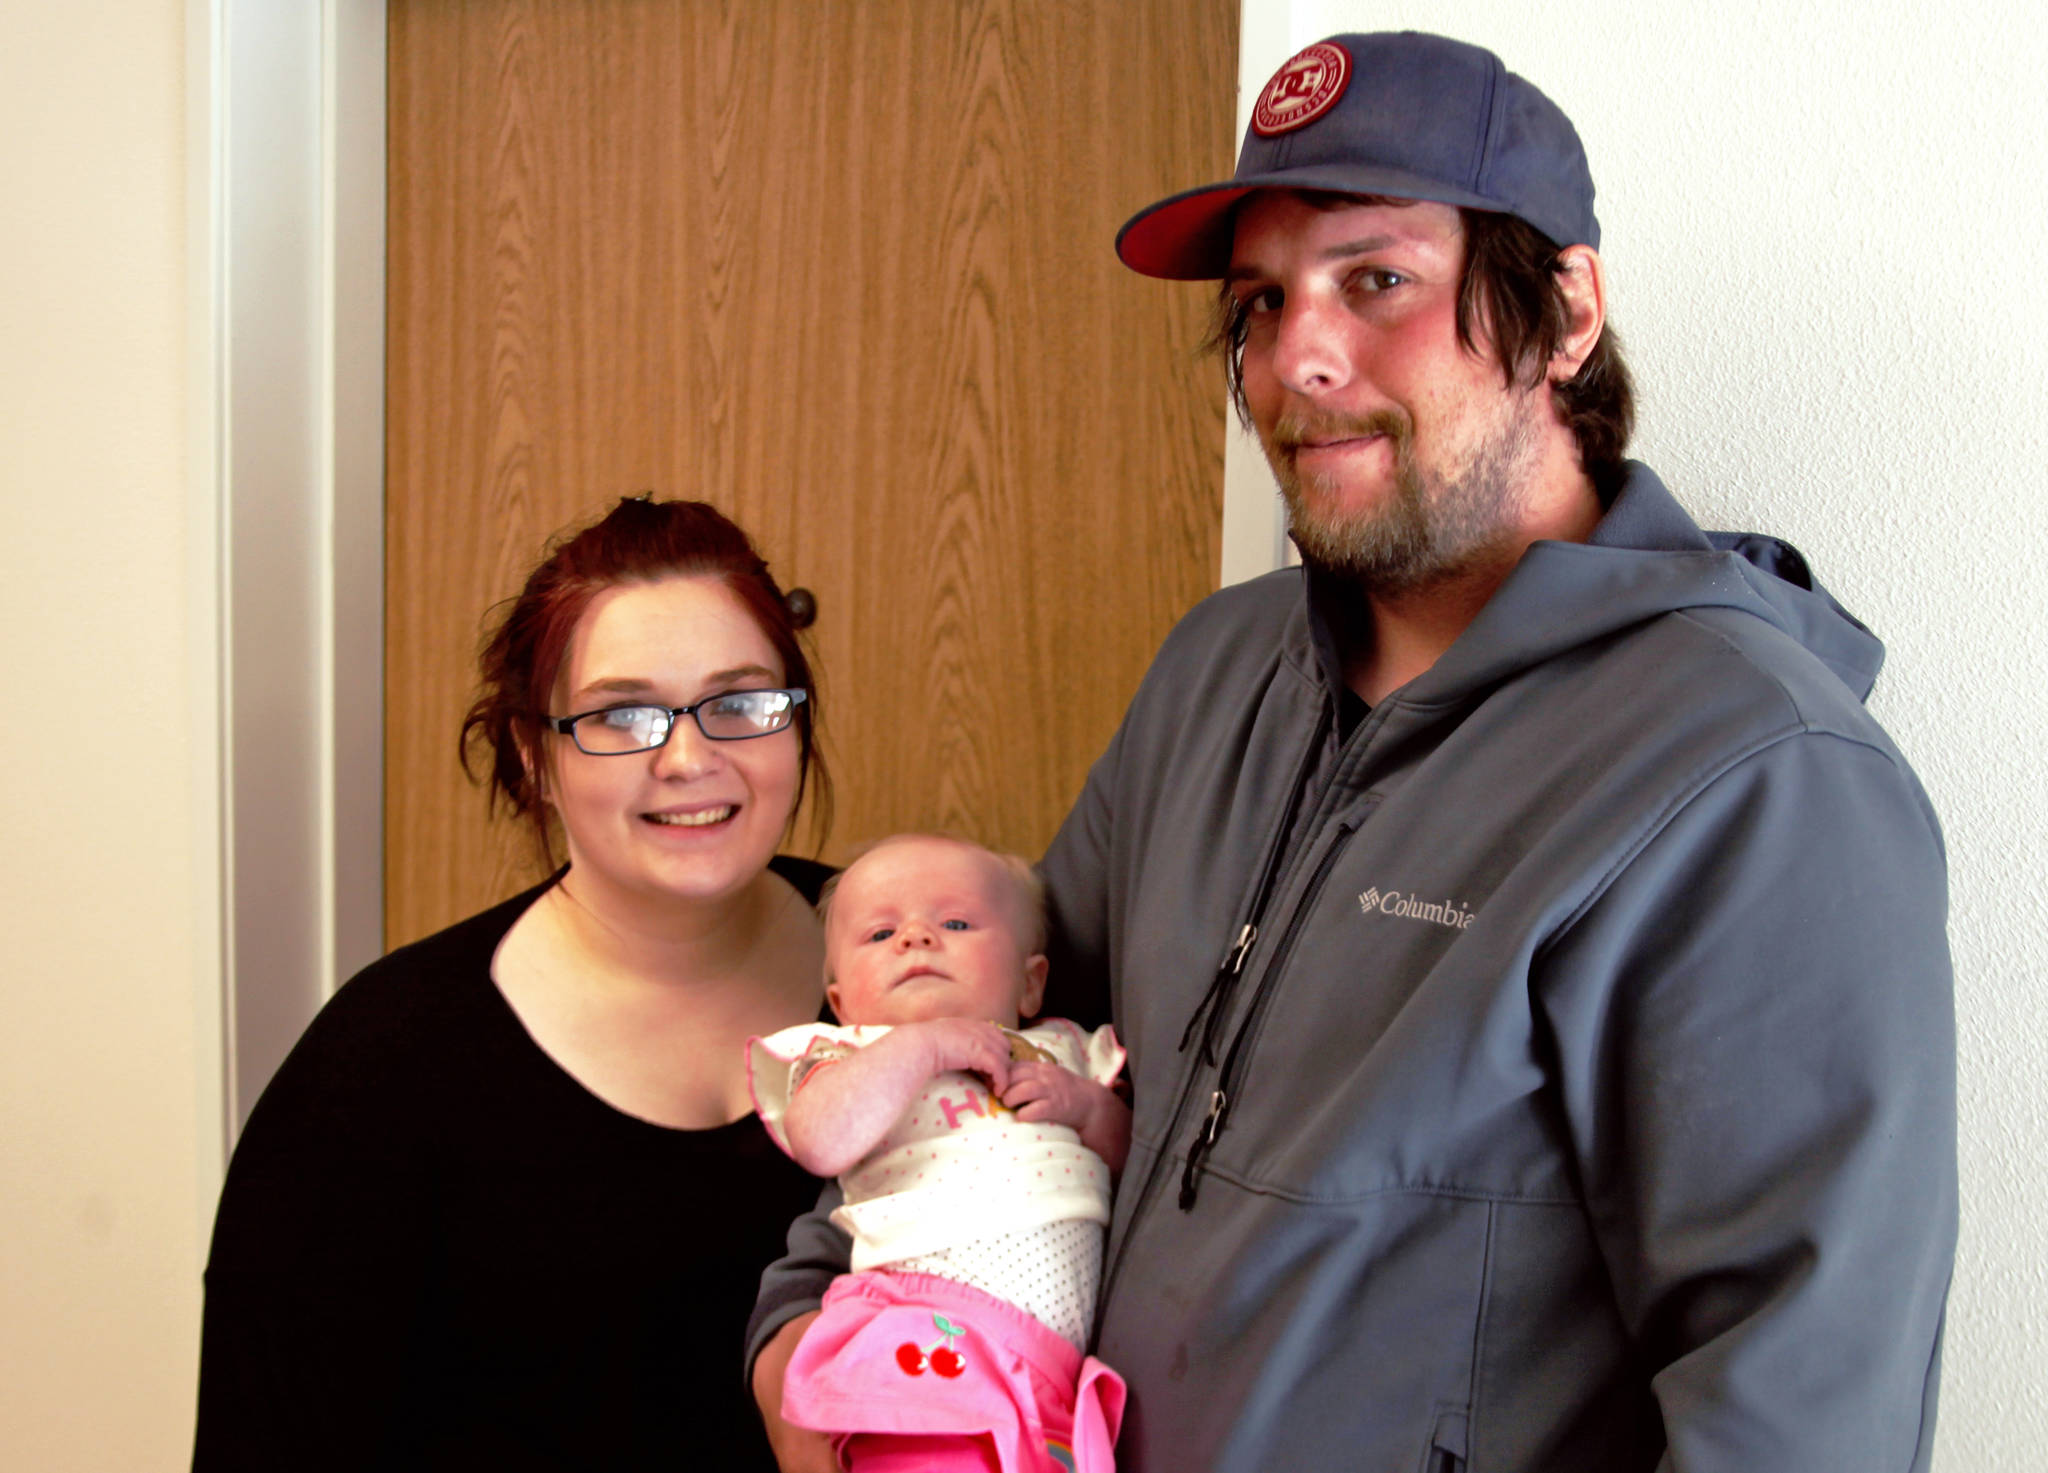 Alycia Backstrom (left) and Steven Taylor pose with infant Bailey Backstrom outside their rooms in Kenai’s new Clear Pointe six-plex — the city’s first income-restricted rental housing, constructed by the Homer-based not-for-profit Kenai Housing Initiative — on Wednesday, April 4, 2018 in Kenai, Alaska. After a roughly two-month search for a place to live, Taylor and Backstrom became Clear Pointe’s first tennants after moving in Monday. (Ben Boettger/Peninsula Clarion)